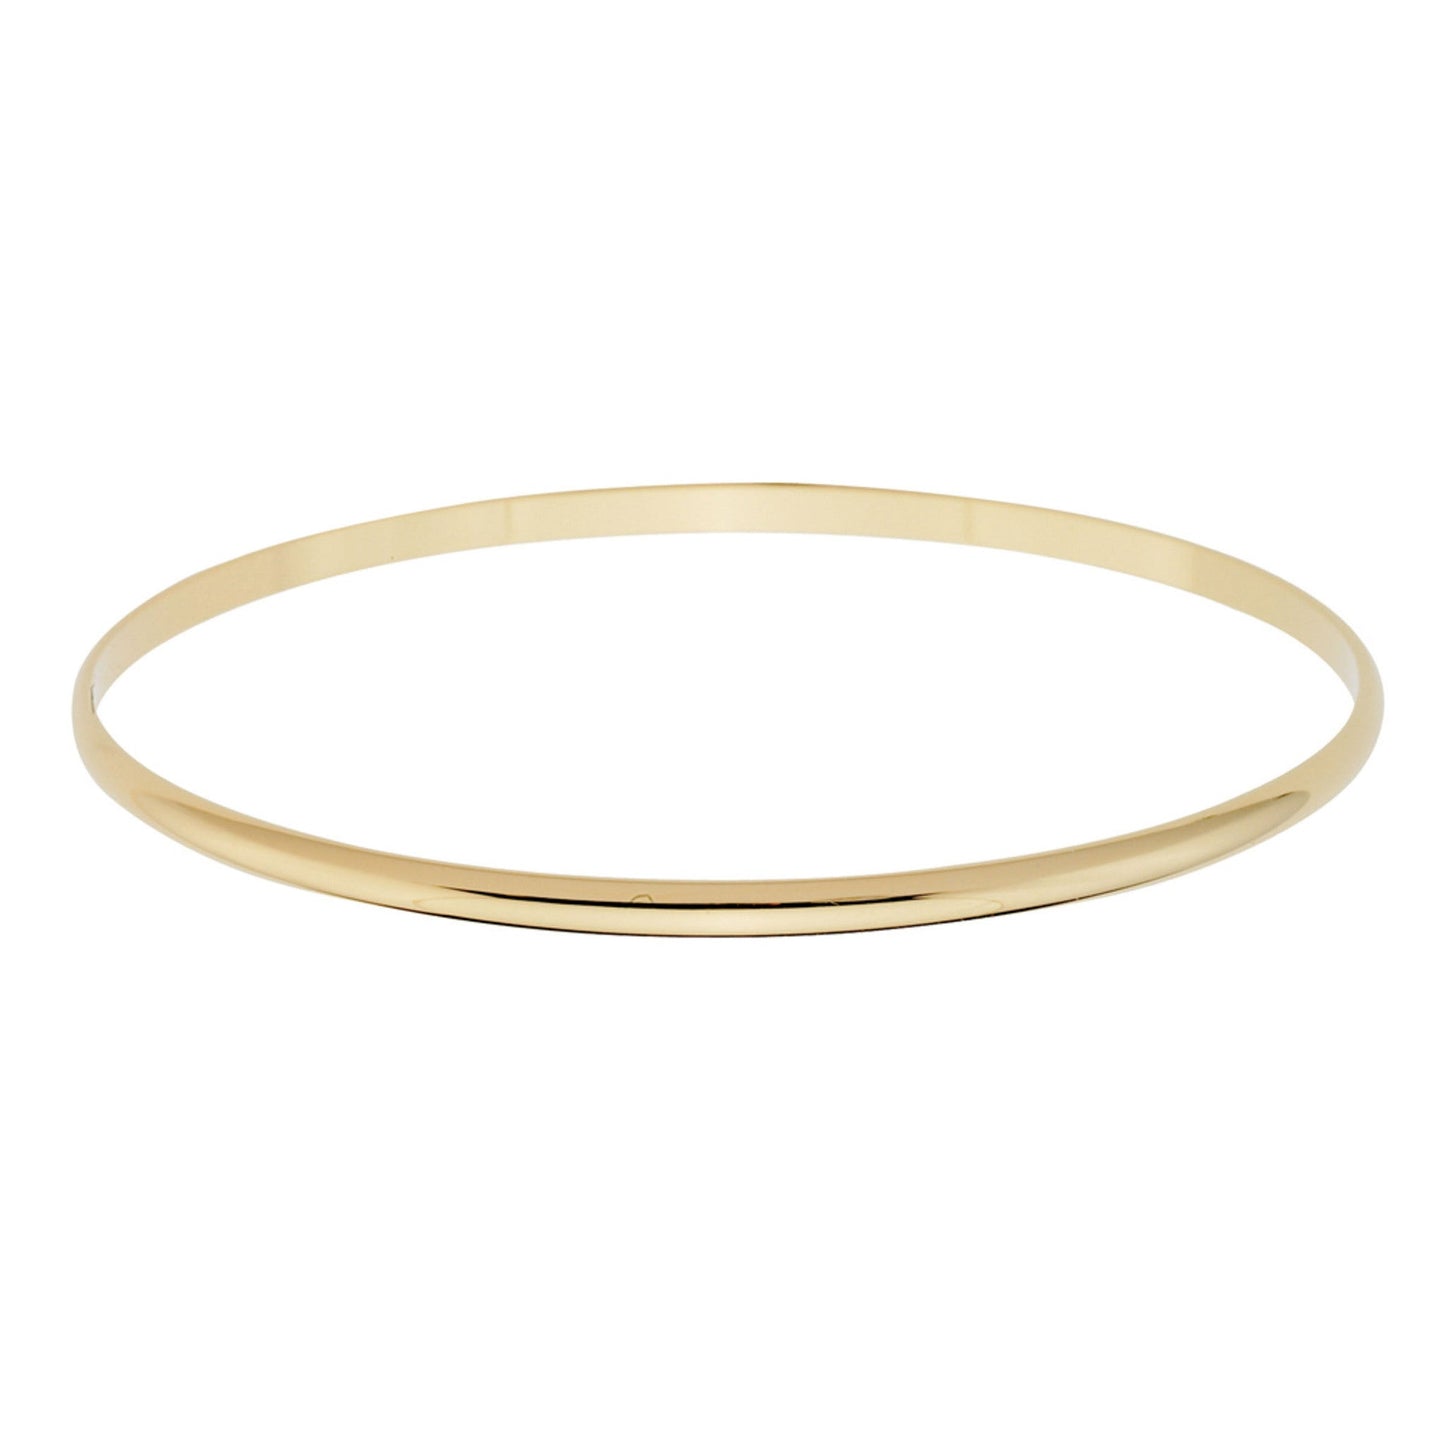 A 1/8" extra large bangle bracelet displayed on a neutral white background.